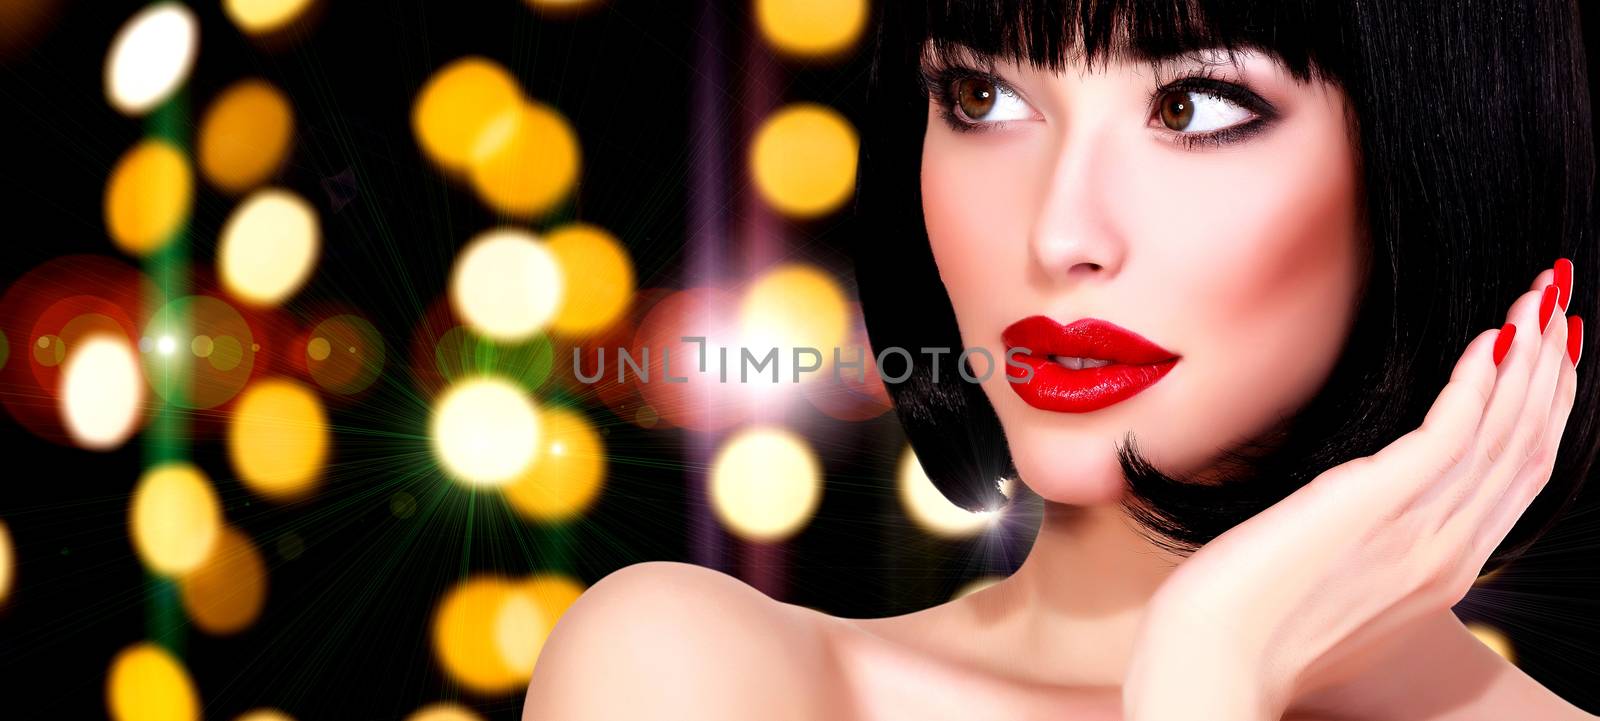 Pretty woman against an abstract background with blurred lights by Nobilior